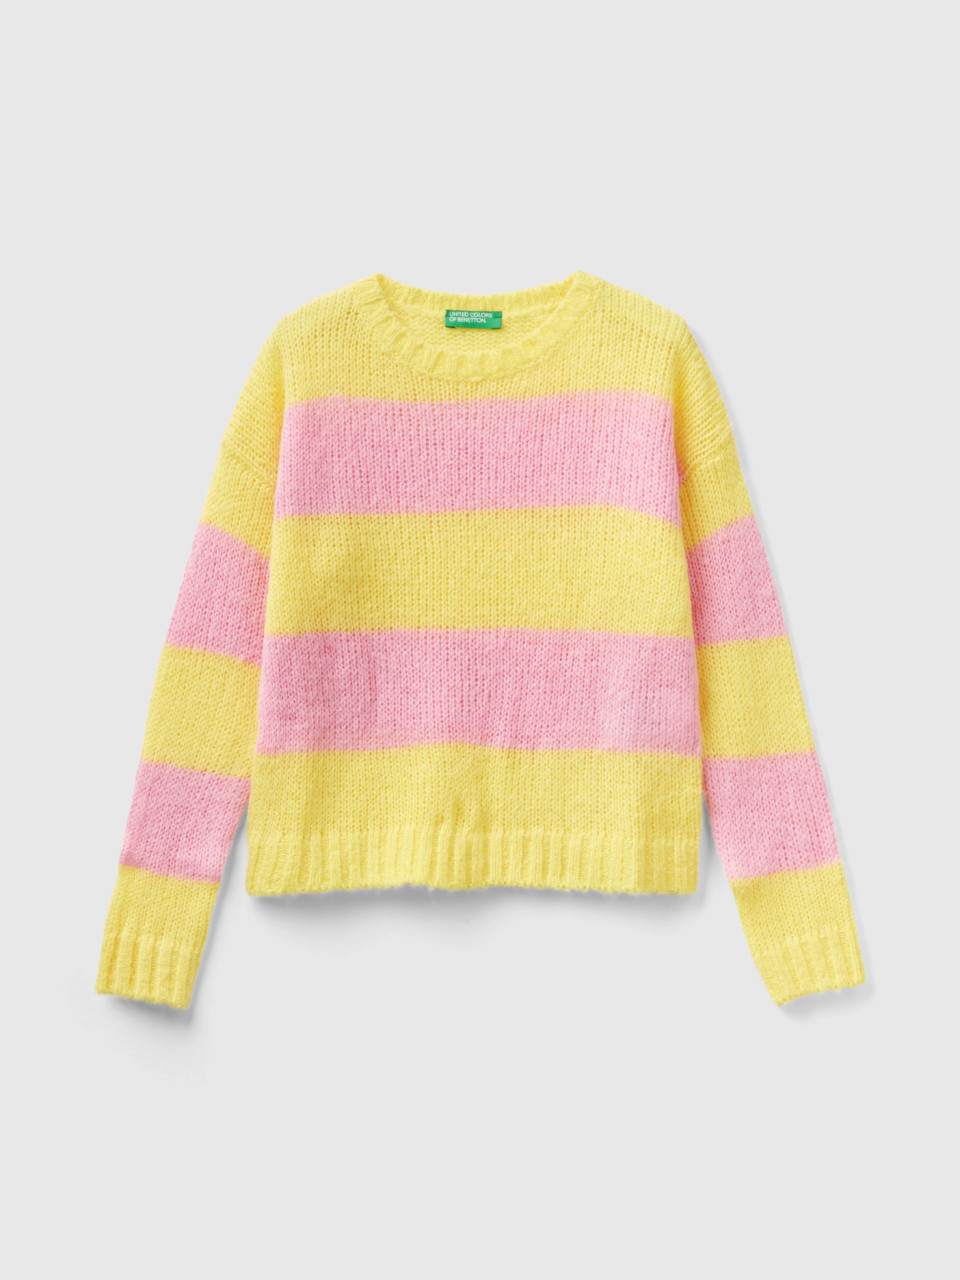 Benetton, Sweater With Two-tone Stripes, Yellow, Kids